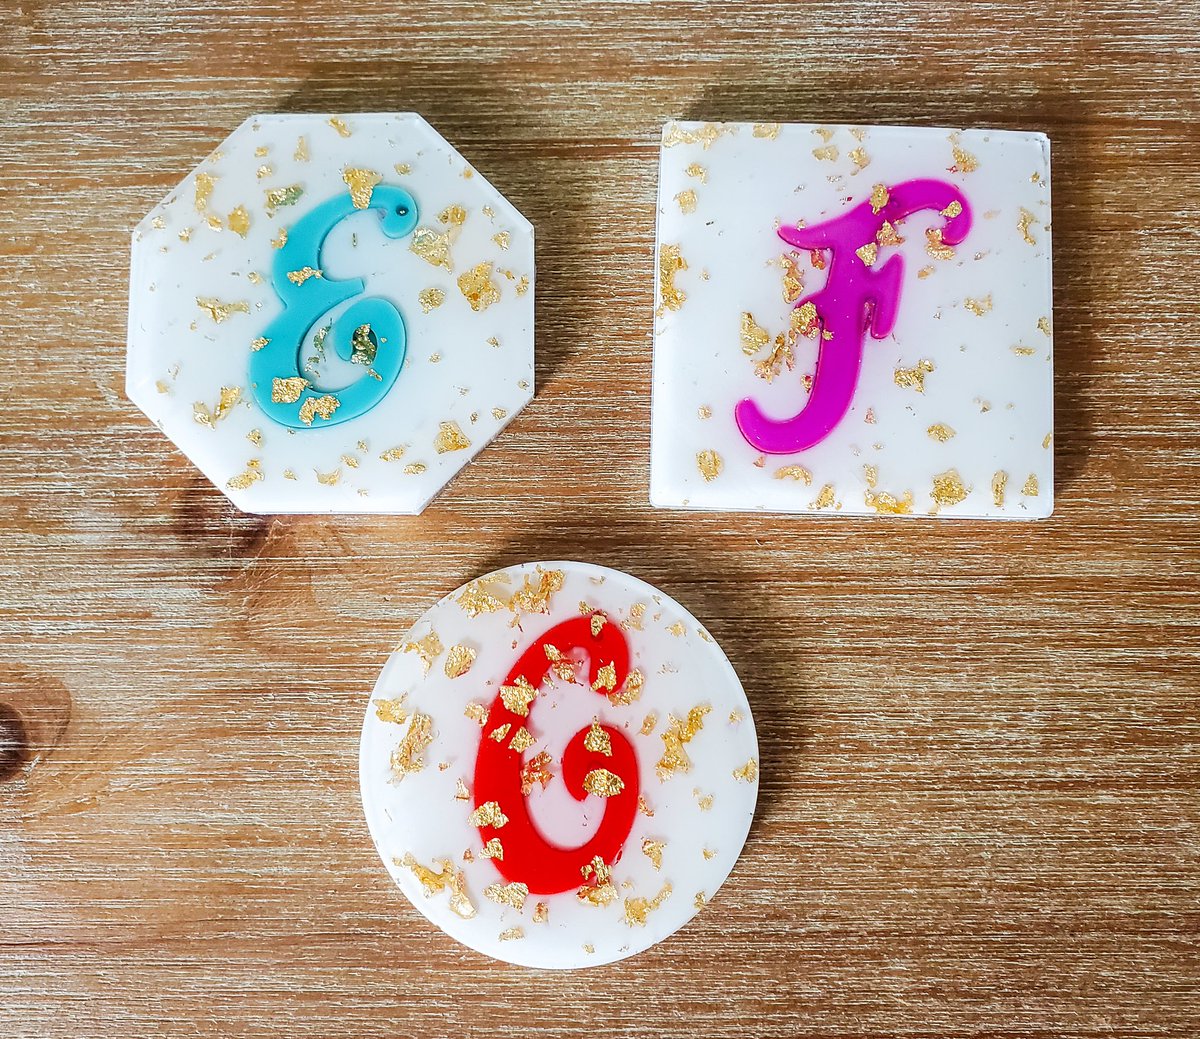 Personalized Initial Resin Coasters 🌈✨️☕️
etsy.com/listing/150728…
#etsy #HandmadeHour #giftbetter #giftideas #womaninbizhour #SummersAreCool #summer #Resin #coaster #homedecor #coffeeaddict #coffelover #Personalization #personalizedgifts #uniquegifts #Wednesday #humpday